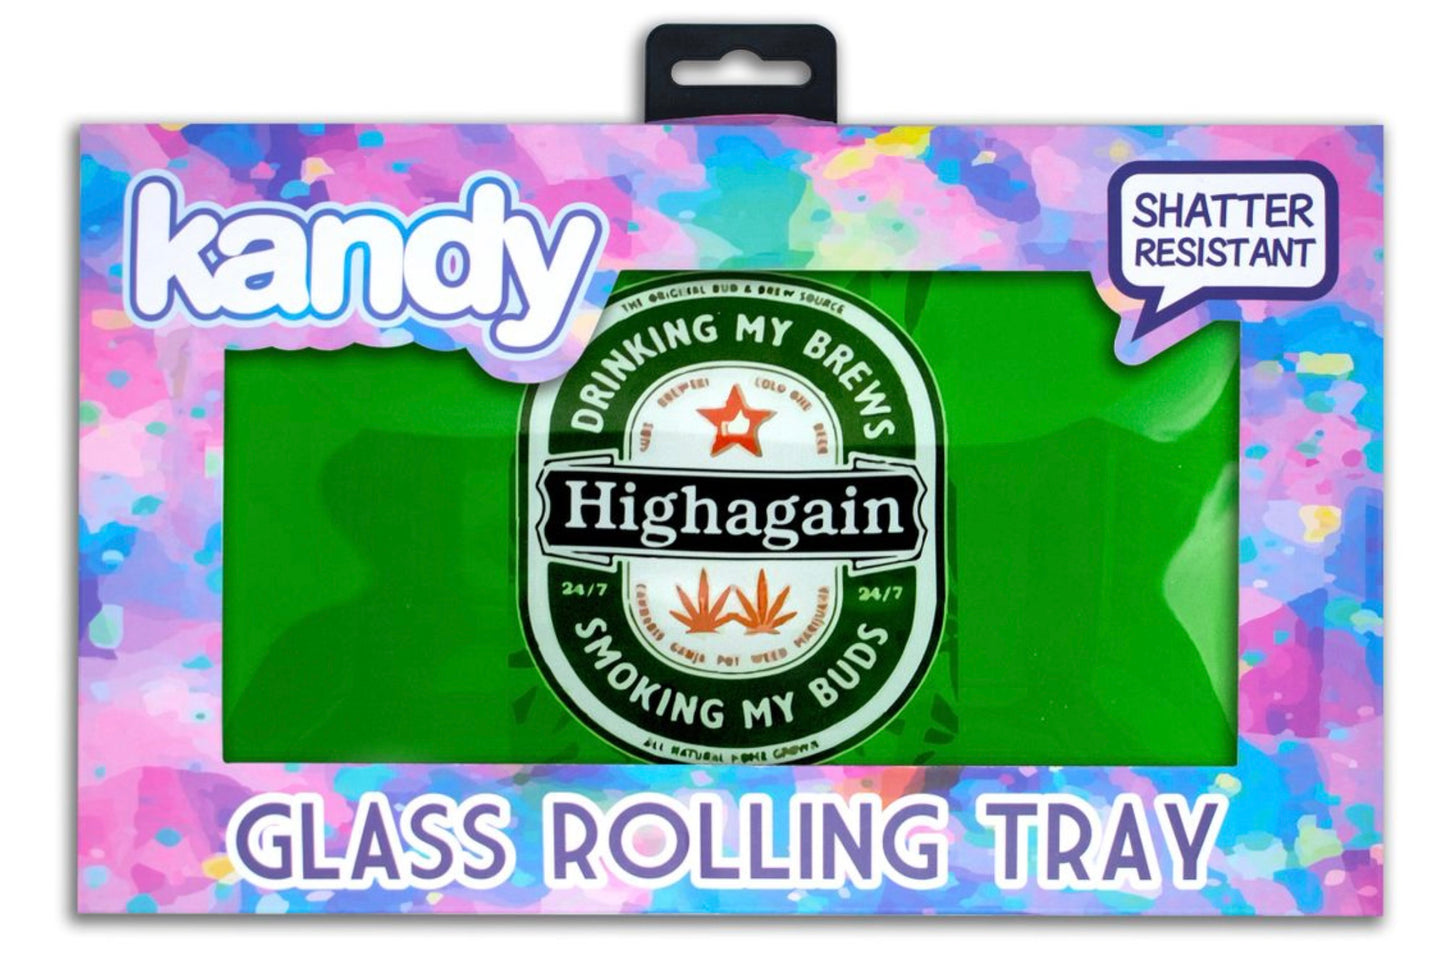 Kandy Smoke “Highagain” Glass Rolling Tray yoga smokes yoga studio, delivery, delivery near me, yoga smokes smoke shop, find smoke shop, head shop near me, yoga studio, headshop, head shop, local smoke shop, psl, psl smoke shop, smoke shop, smokeshop, yoga, yoga studio, dispensary, local dispensary, smokeshop near me, port saint lucie, florida, port st lucie, lounge, life, highlife, love, stoned, highsociety. Yoga Smokes